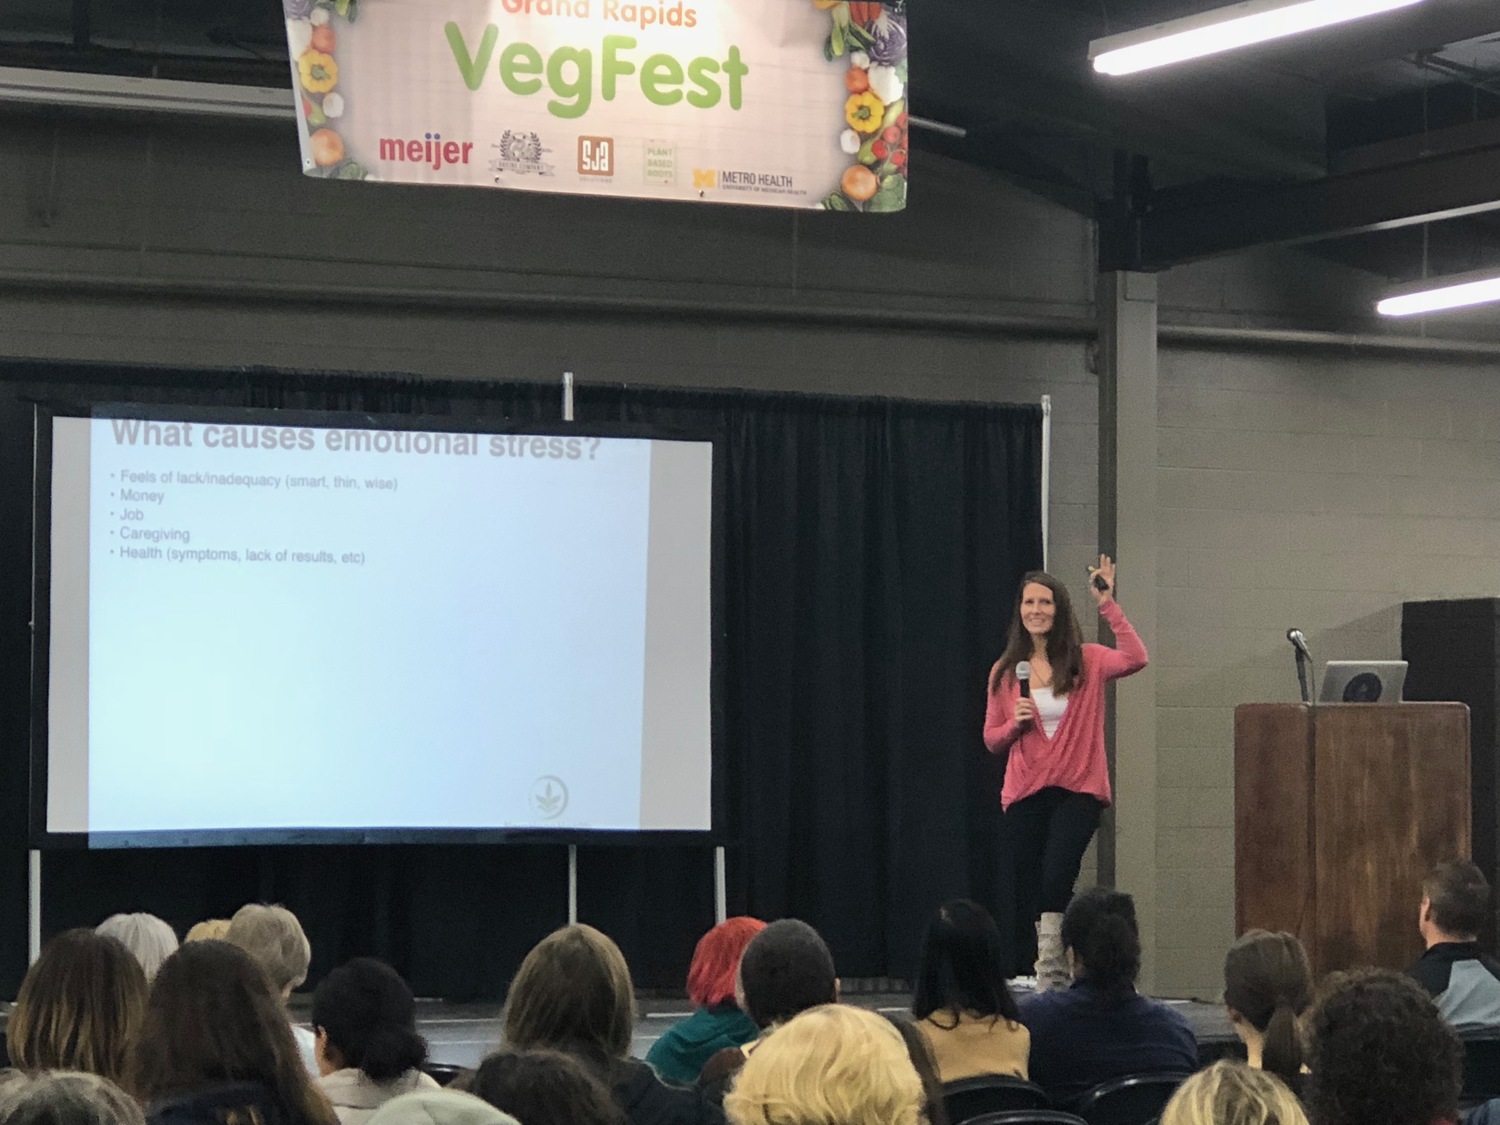 Gallery Photo of Dr. LeAnn speaking at GR VegFest